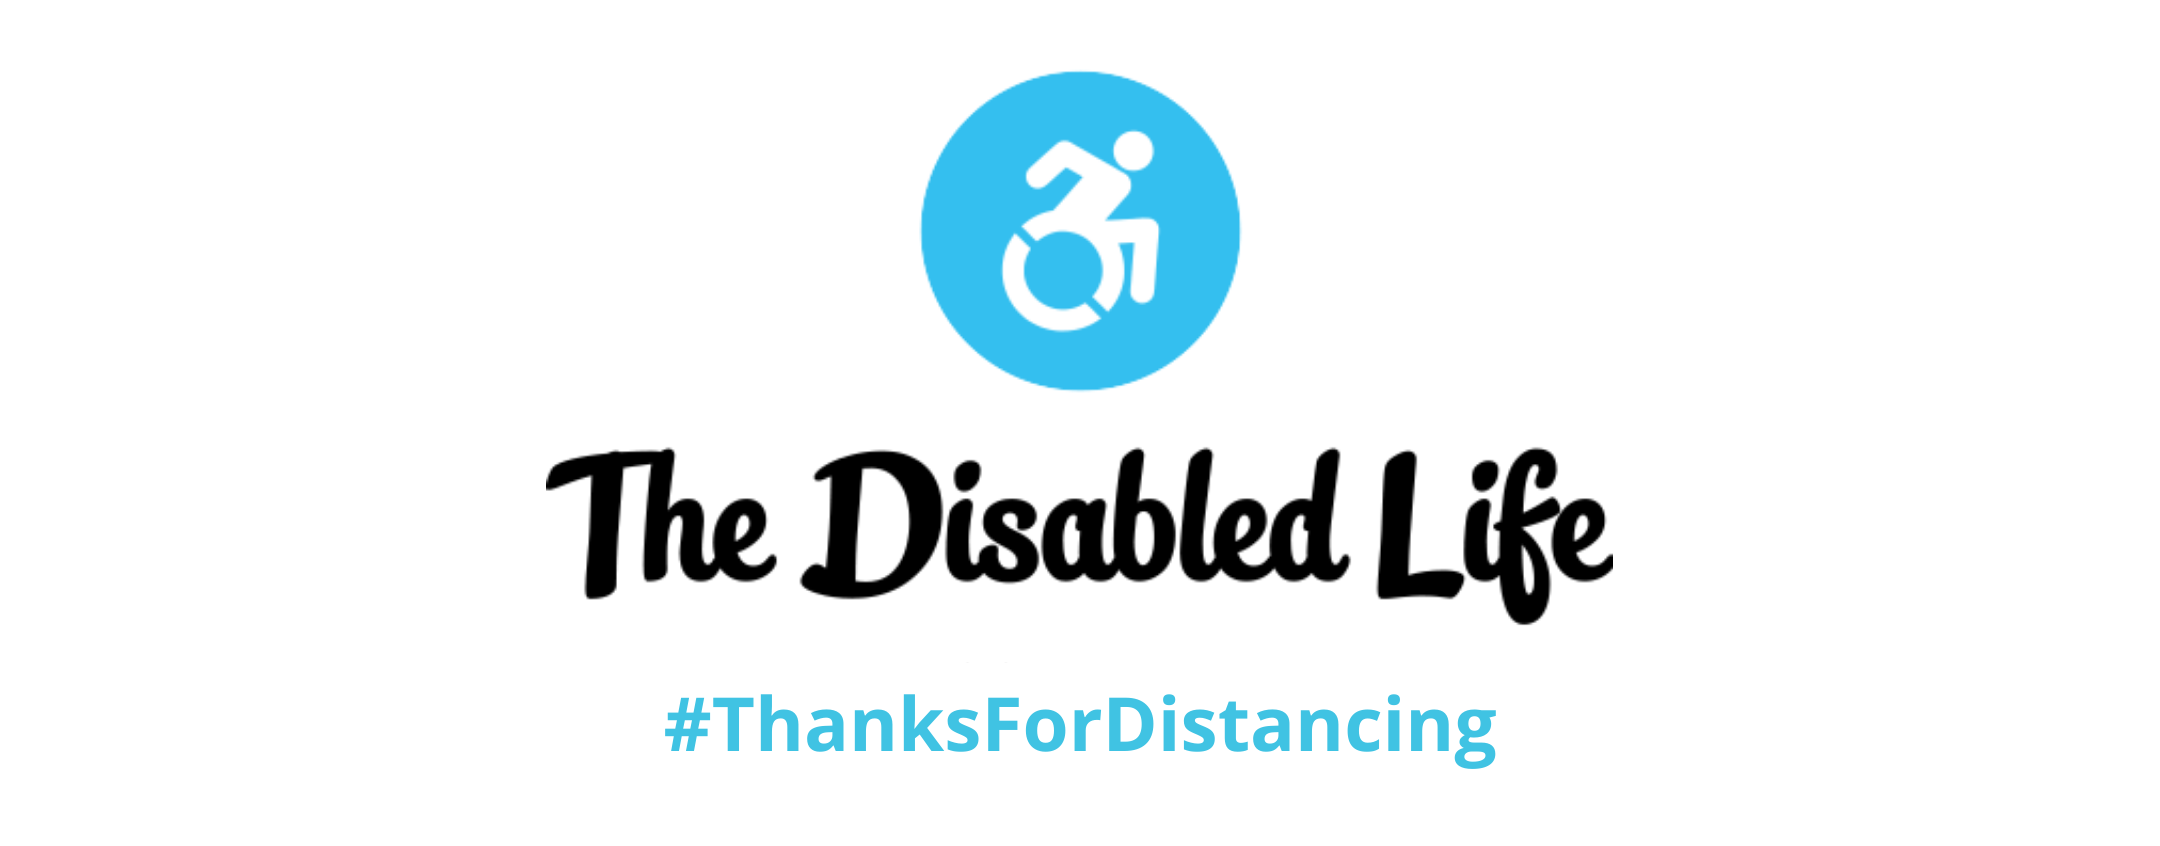 International symbol of access as a logo, below is The Disabled Life title, and #ThanksForDistancing